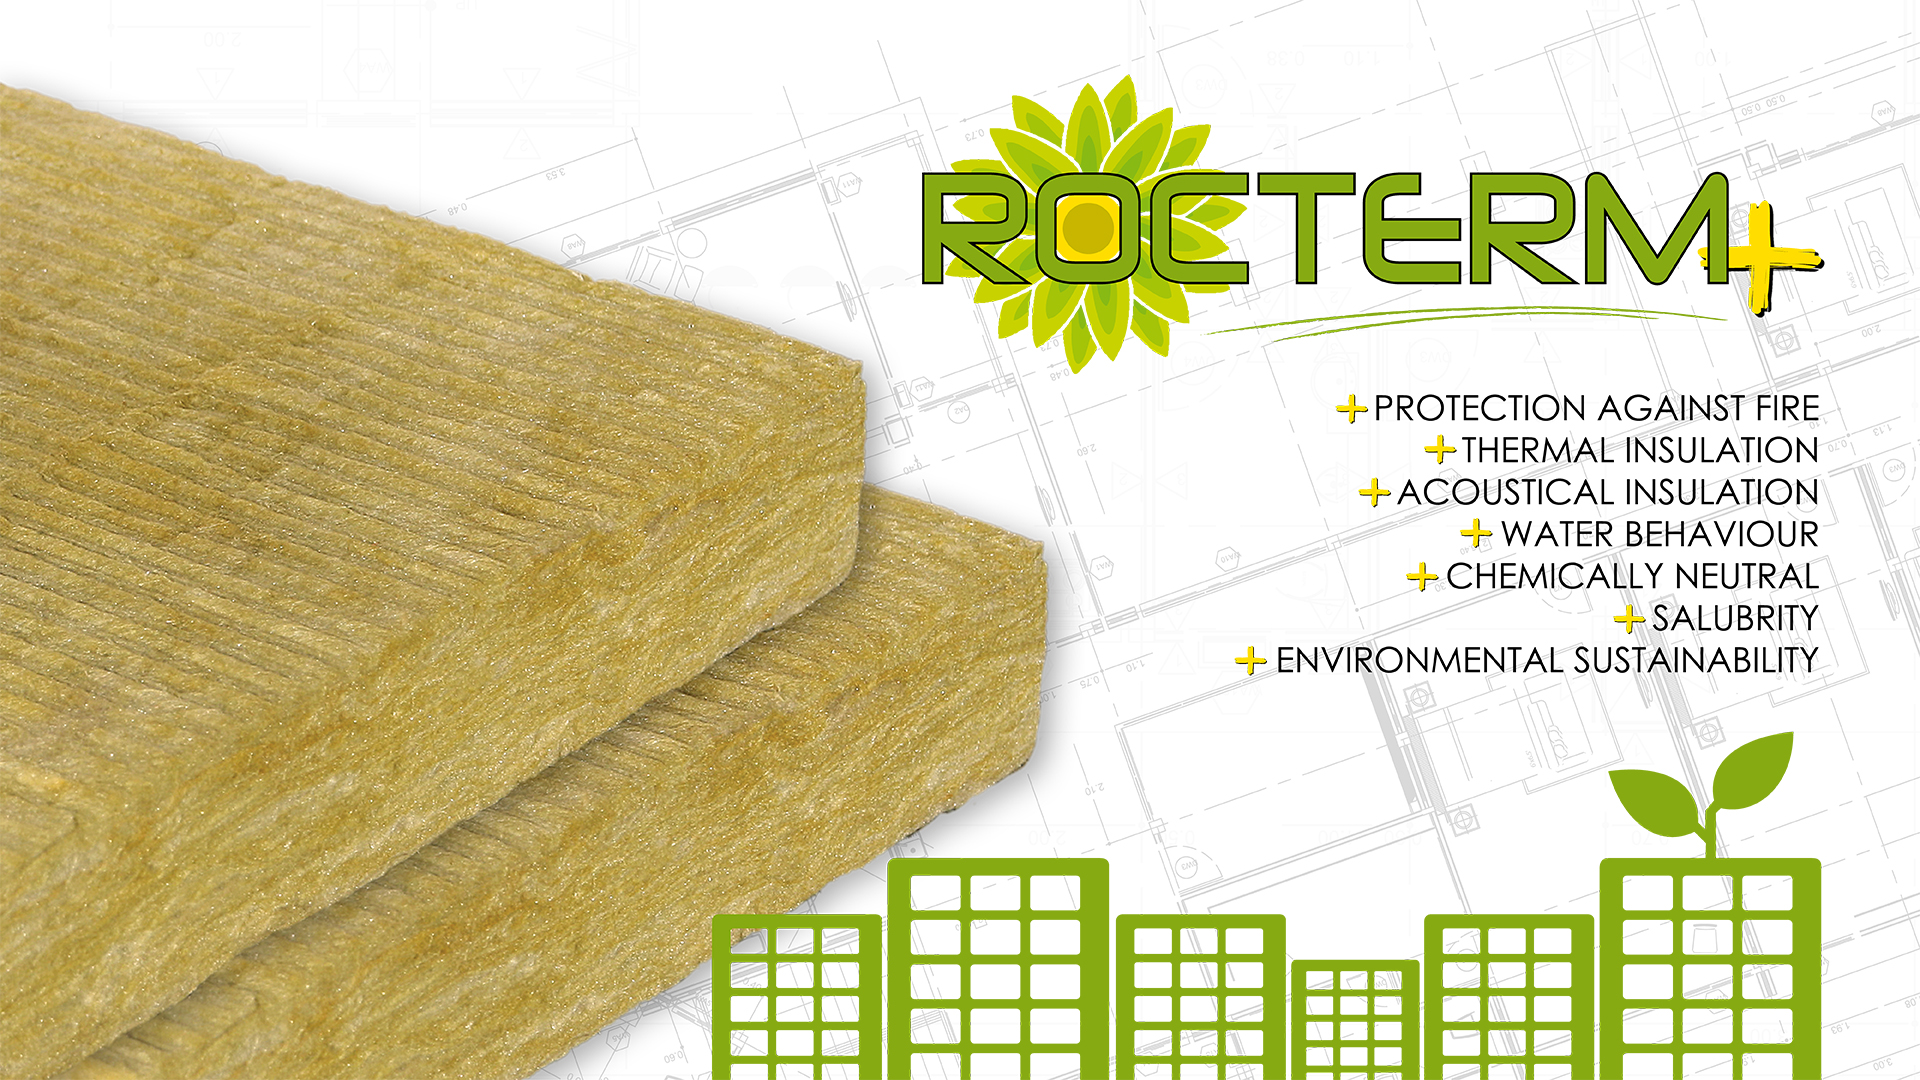 rocterm+intro-fire-protection-thermal-acoustical-insulation-water-behaviour-neutral-salubrity-environmental-sustainability-brand